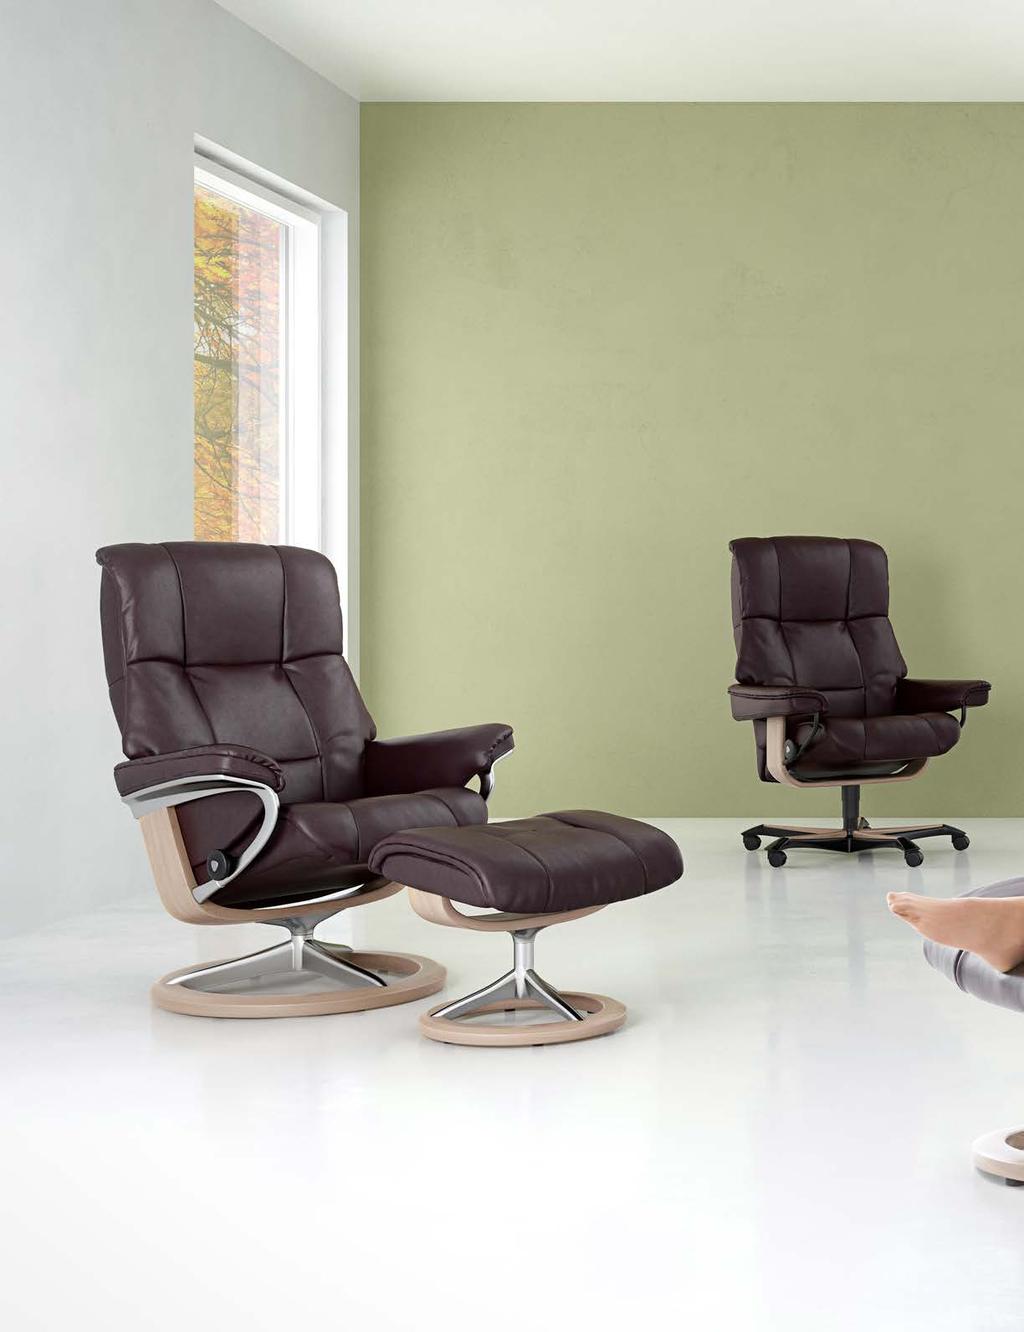 6/7 Our unique comfort your choice All Stressless models offer the ultimate in comfort. So regardless of the base you choose you can be sure that you ll sit like a king or a queen.